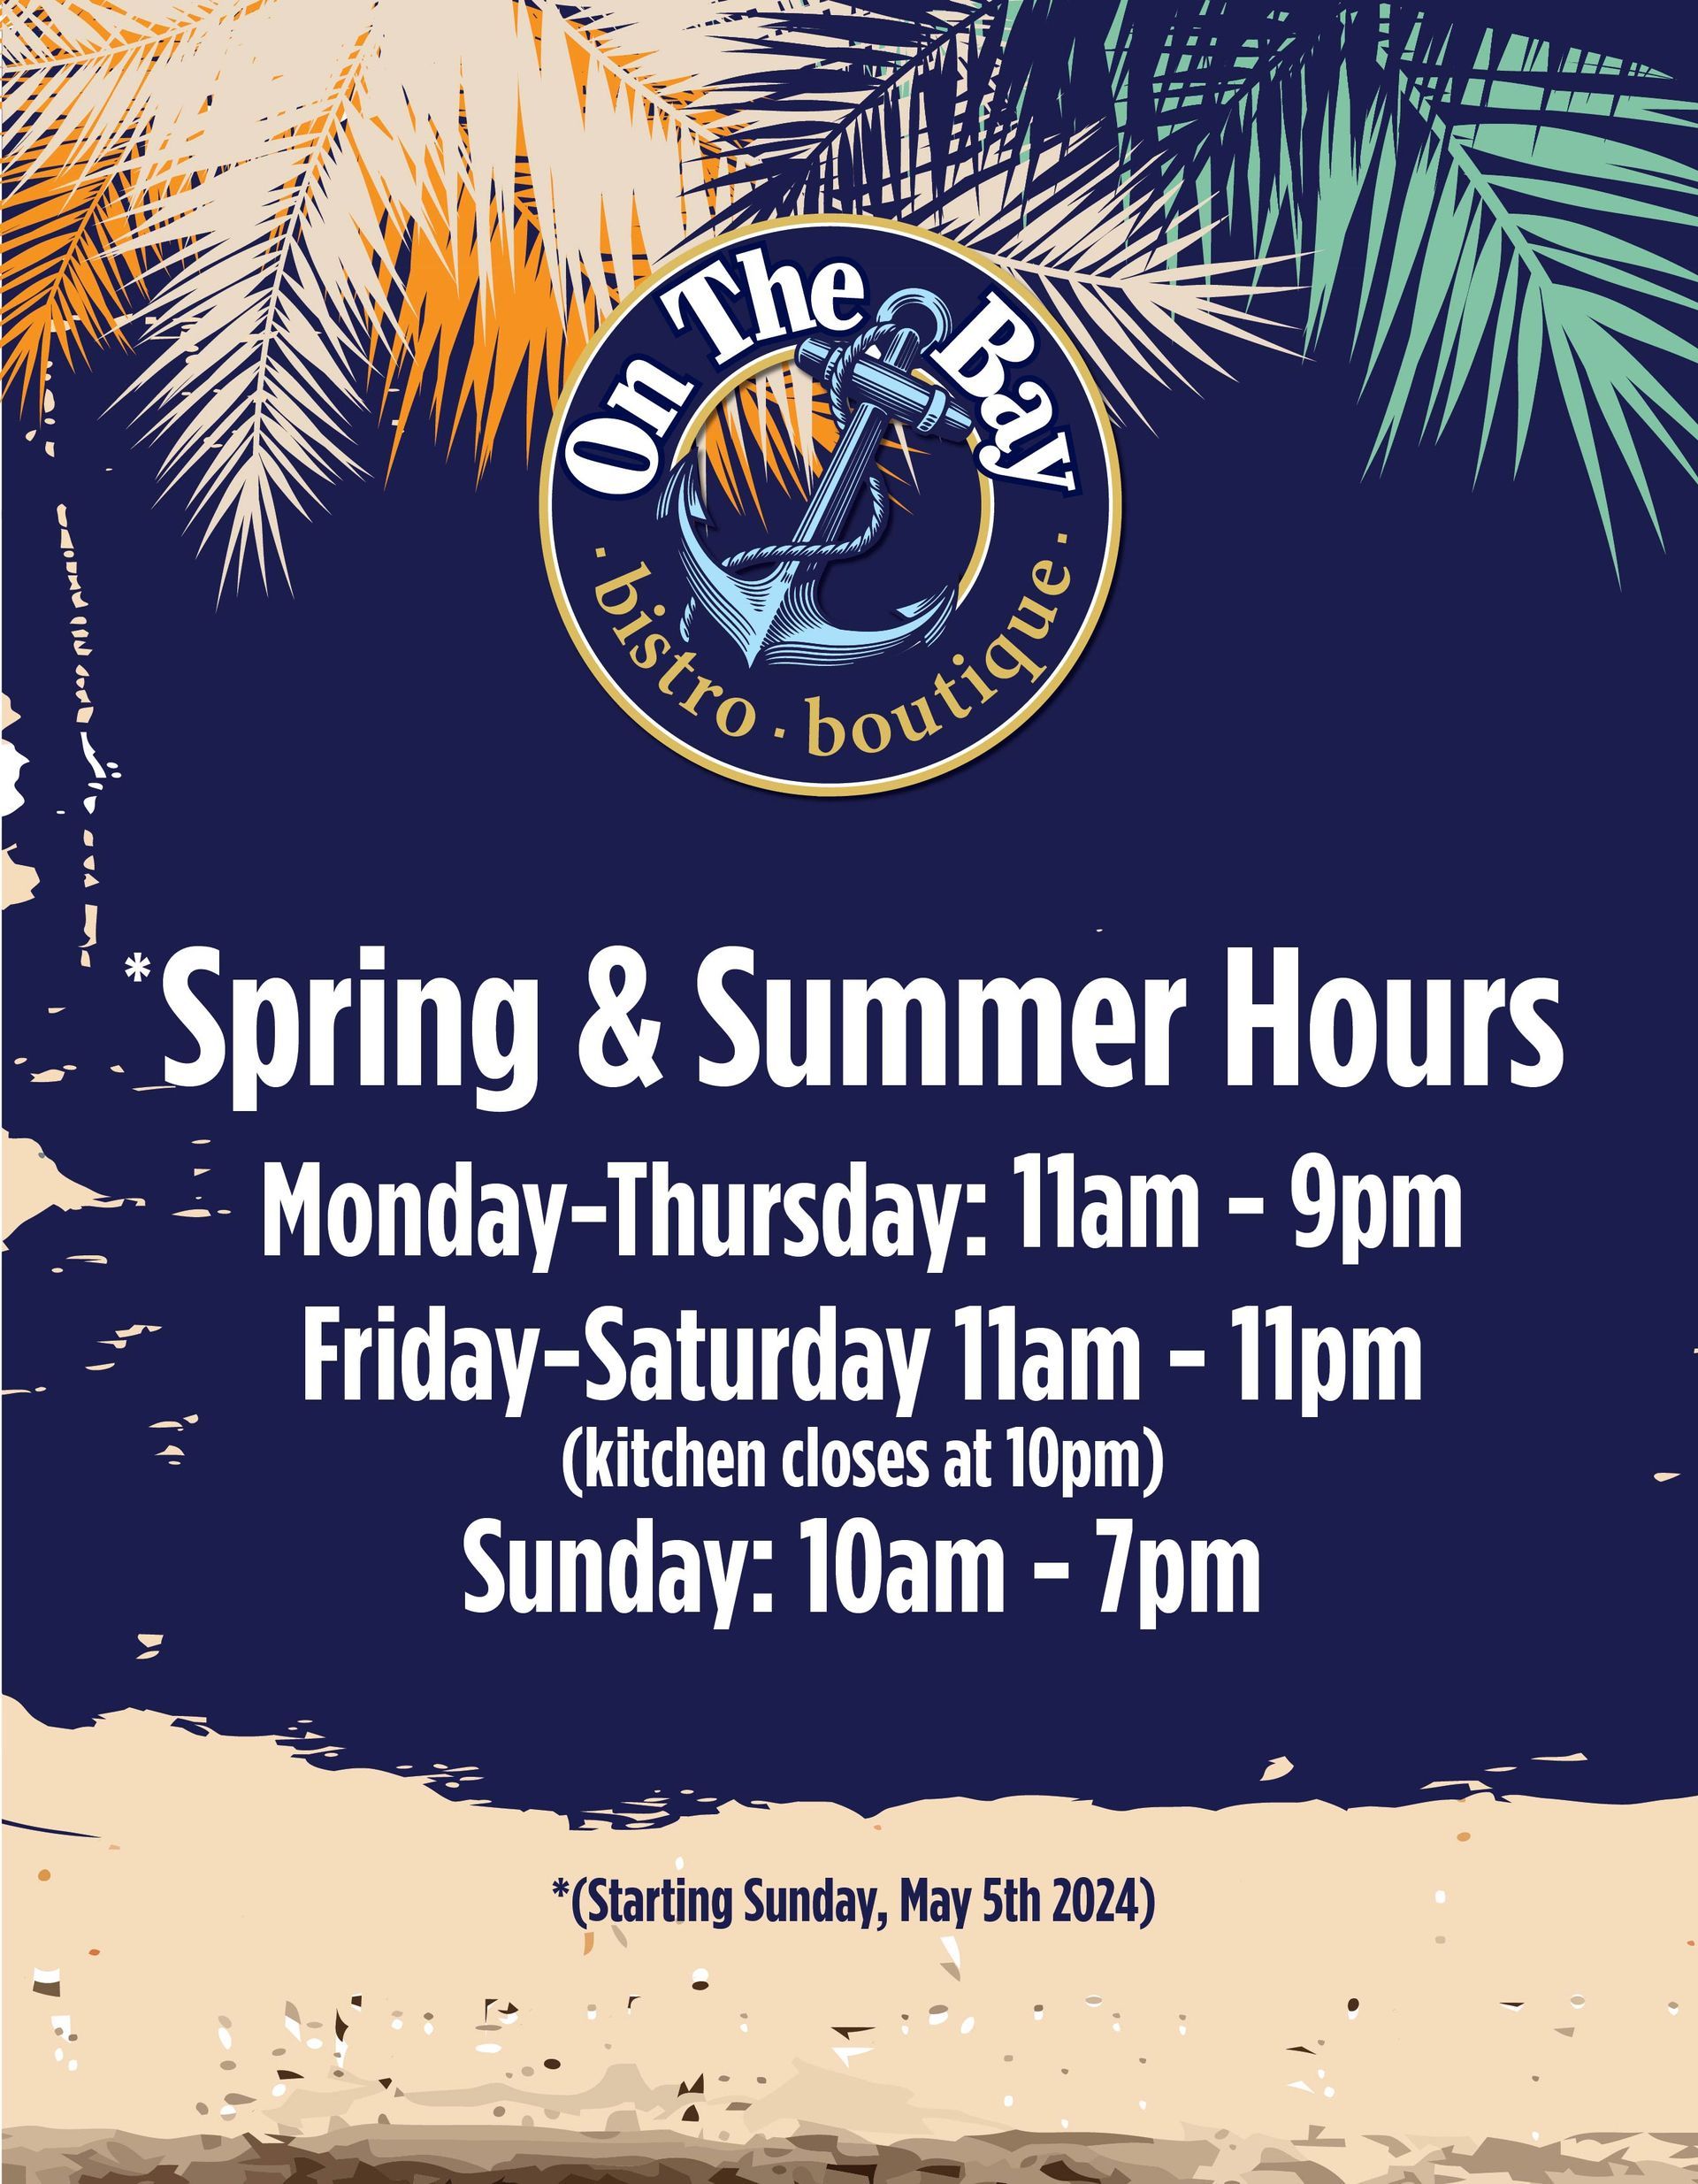 New Sumer hours at On The Bay